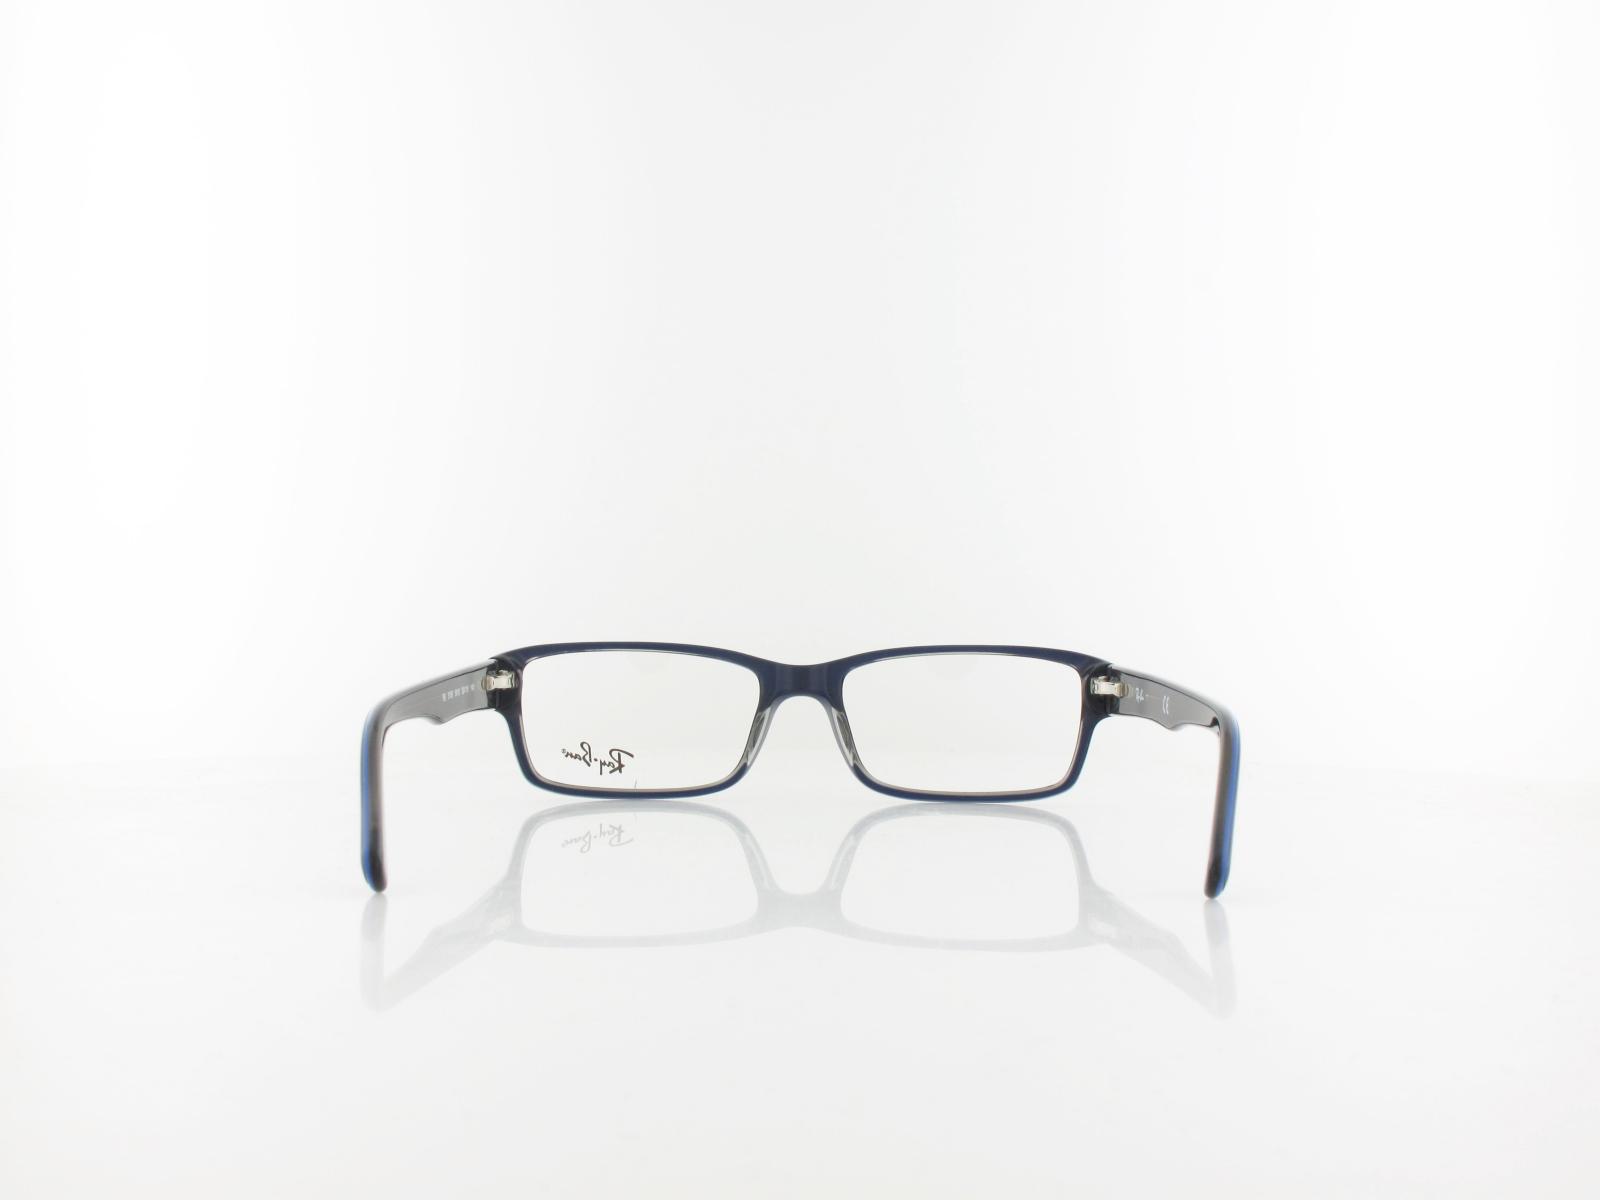 Ray Ban | RX5169 5815 52 | transparent grey on top blue